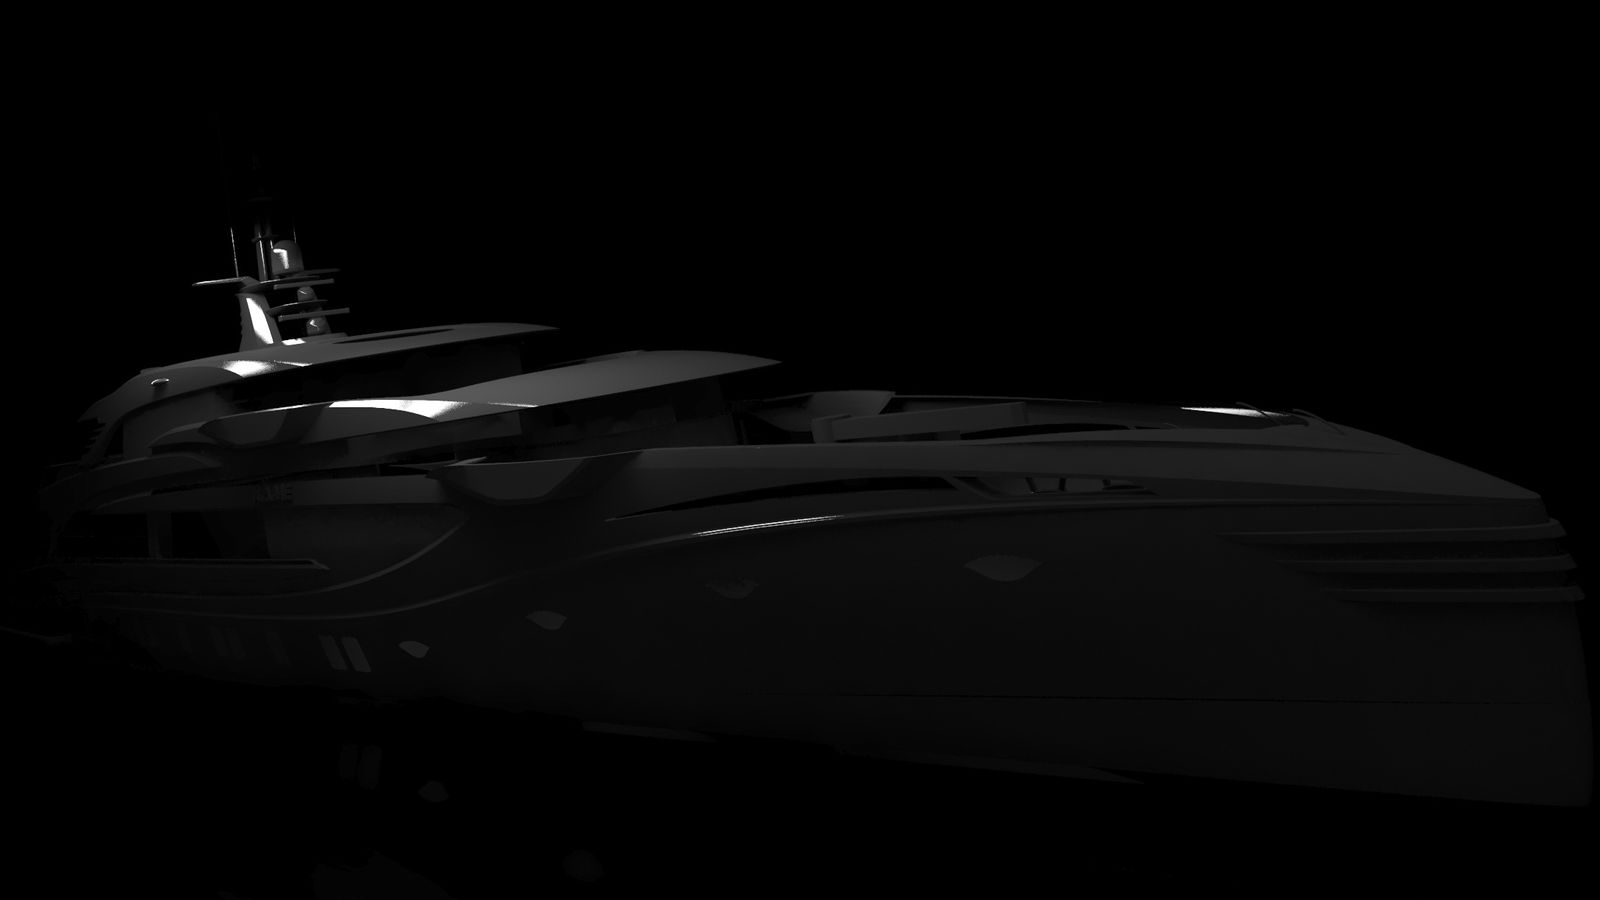 Secretive rendering of PROJECT PHI by Cor D Rover crop16-9